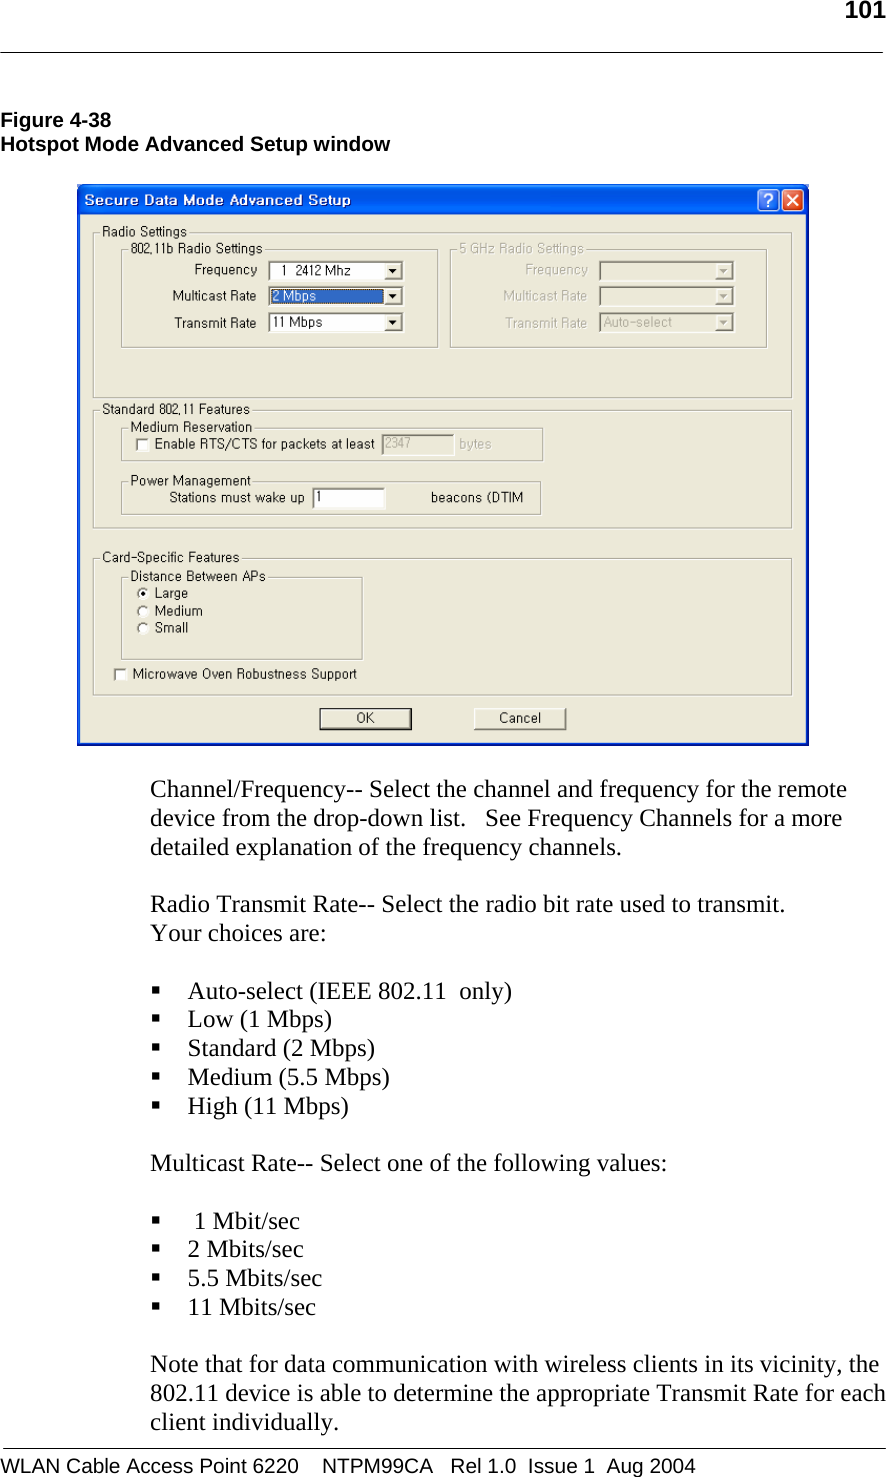   101  Figure 4-38 Hotspot Mode Advanced Setup window     Channel/Frequency-- Select the channel and frequency for the remote device from the drop-down list.   See Frequency Channels for a more detailed explanation of the frequency channels.  Radio Transmit Rate-- Select the radio bit rate used to transmit.  Your choices are:   Auto-select (IEEE 802.11  only)  Low (1 Mbps)  Standard (2 Mbps)  Medium (5.5 Mbps)  High (11 Mbps)  Multicast Rate-- Select one of the following values:    1 Mbit/sec  2 Mbits/sec  5.5 Mbits/sec  11 Mbits/sec  Note that for data communication with wireless clients in its vicinity, the 802.11 device is able to determine the appropriate Transmit Rate for each client individually.  WLAN Cable Access Point 6220    NTPM99CA   Rel 1.0  Issue 1  Aug 2004 